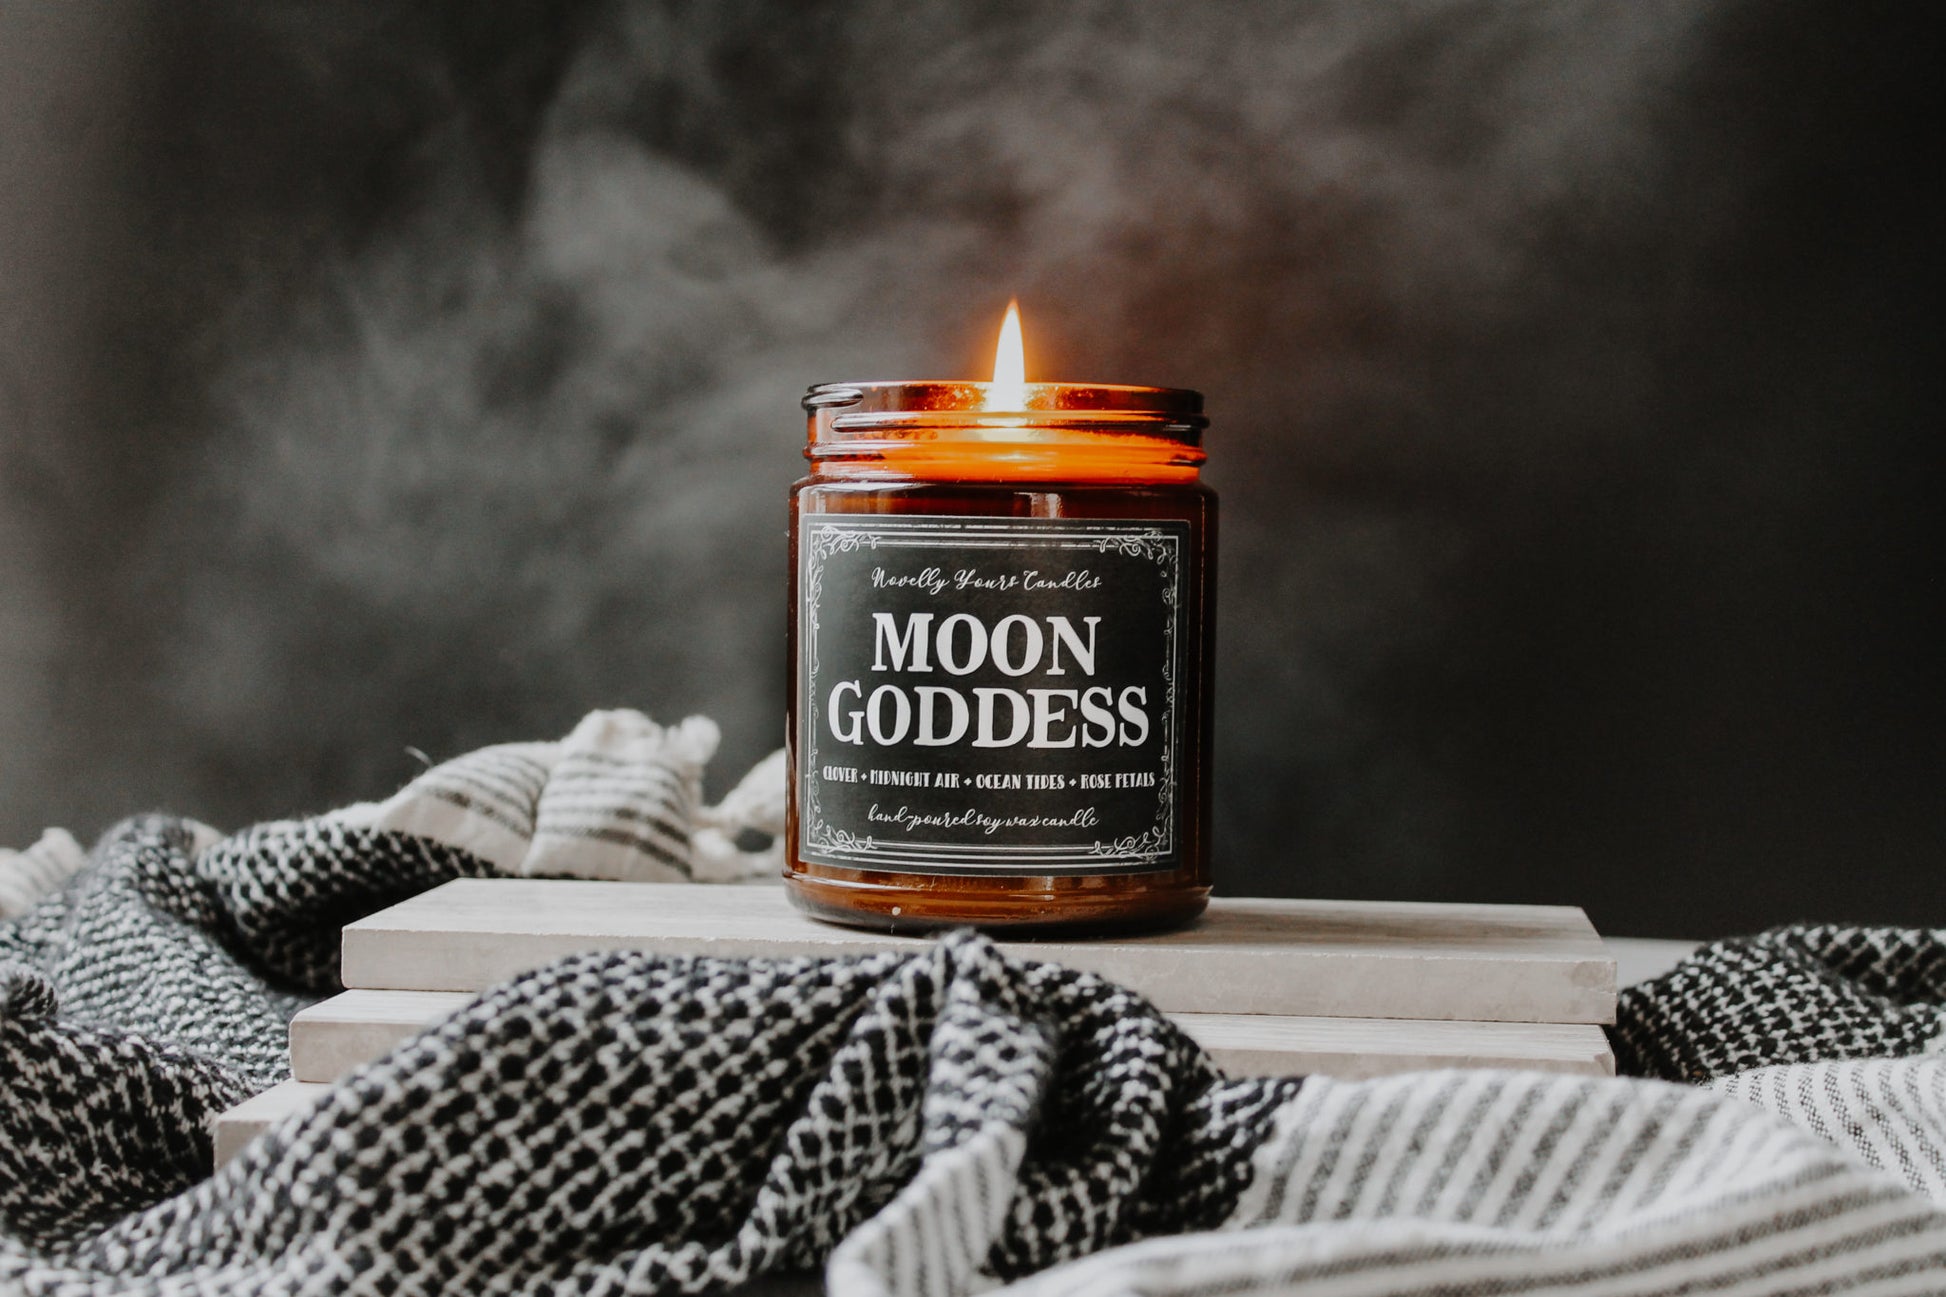 moon goddess scented soy wax candle in amber glass jar, lit surrounded by black and white towel